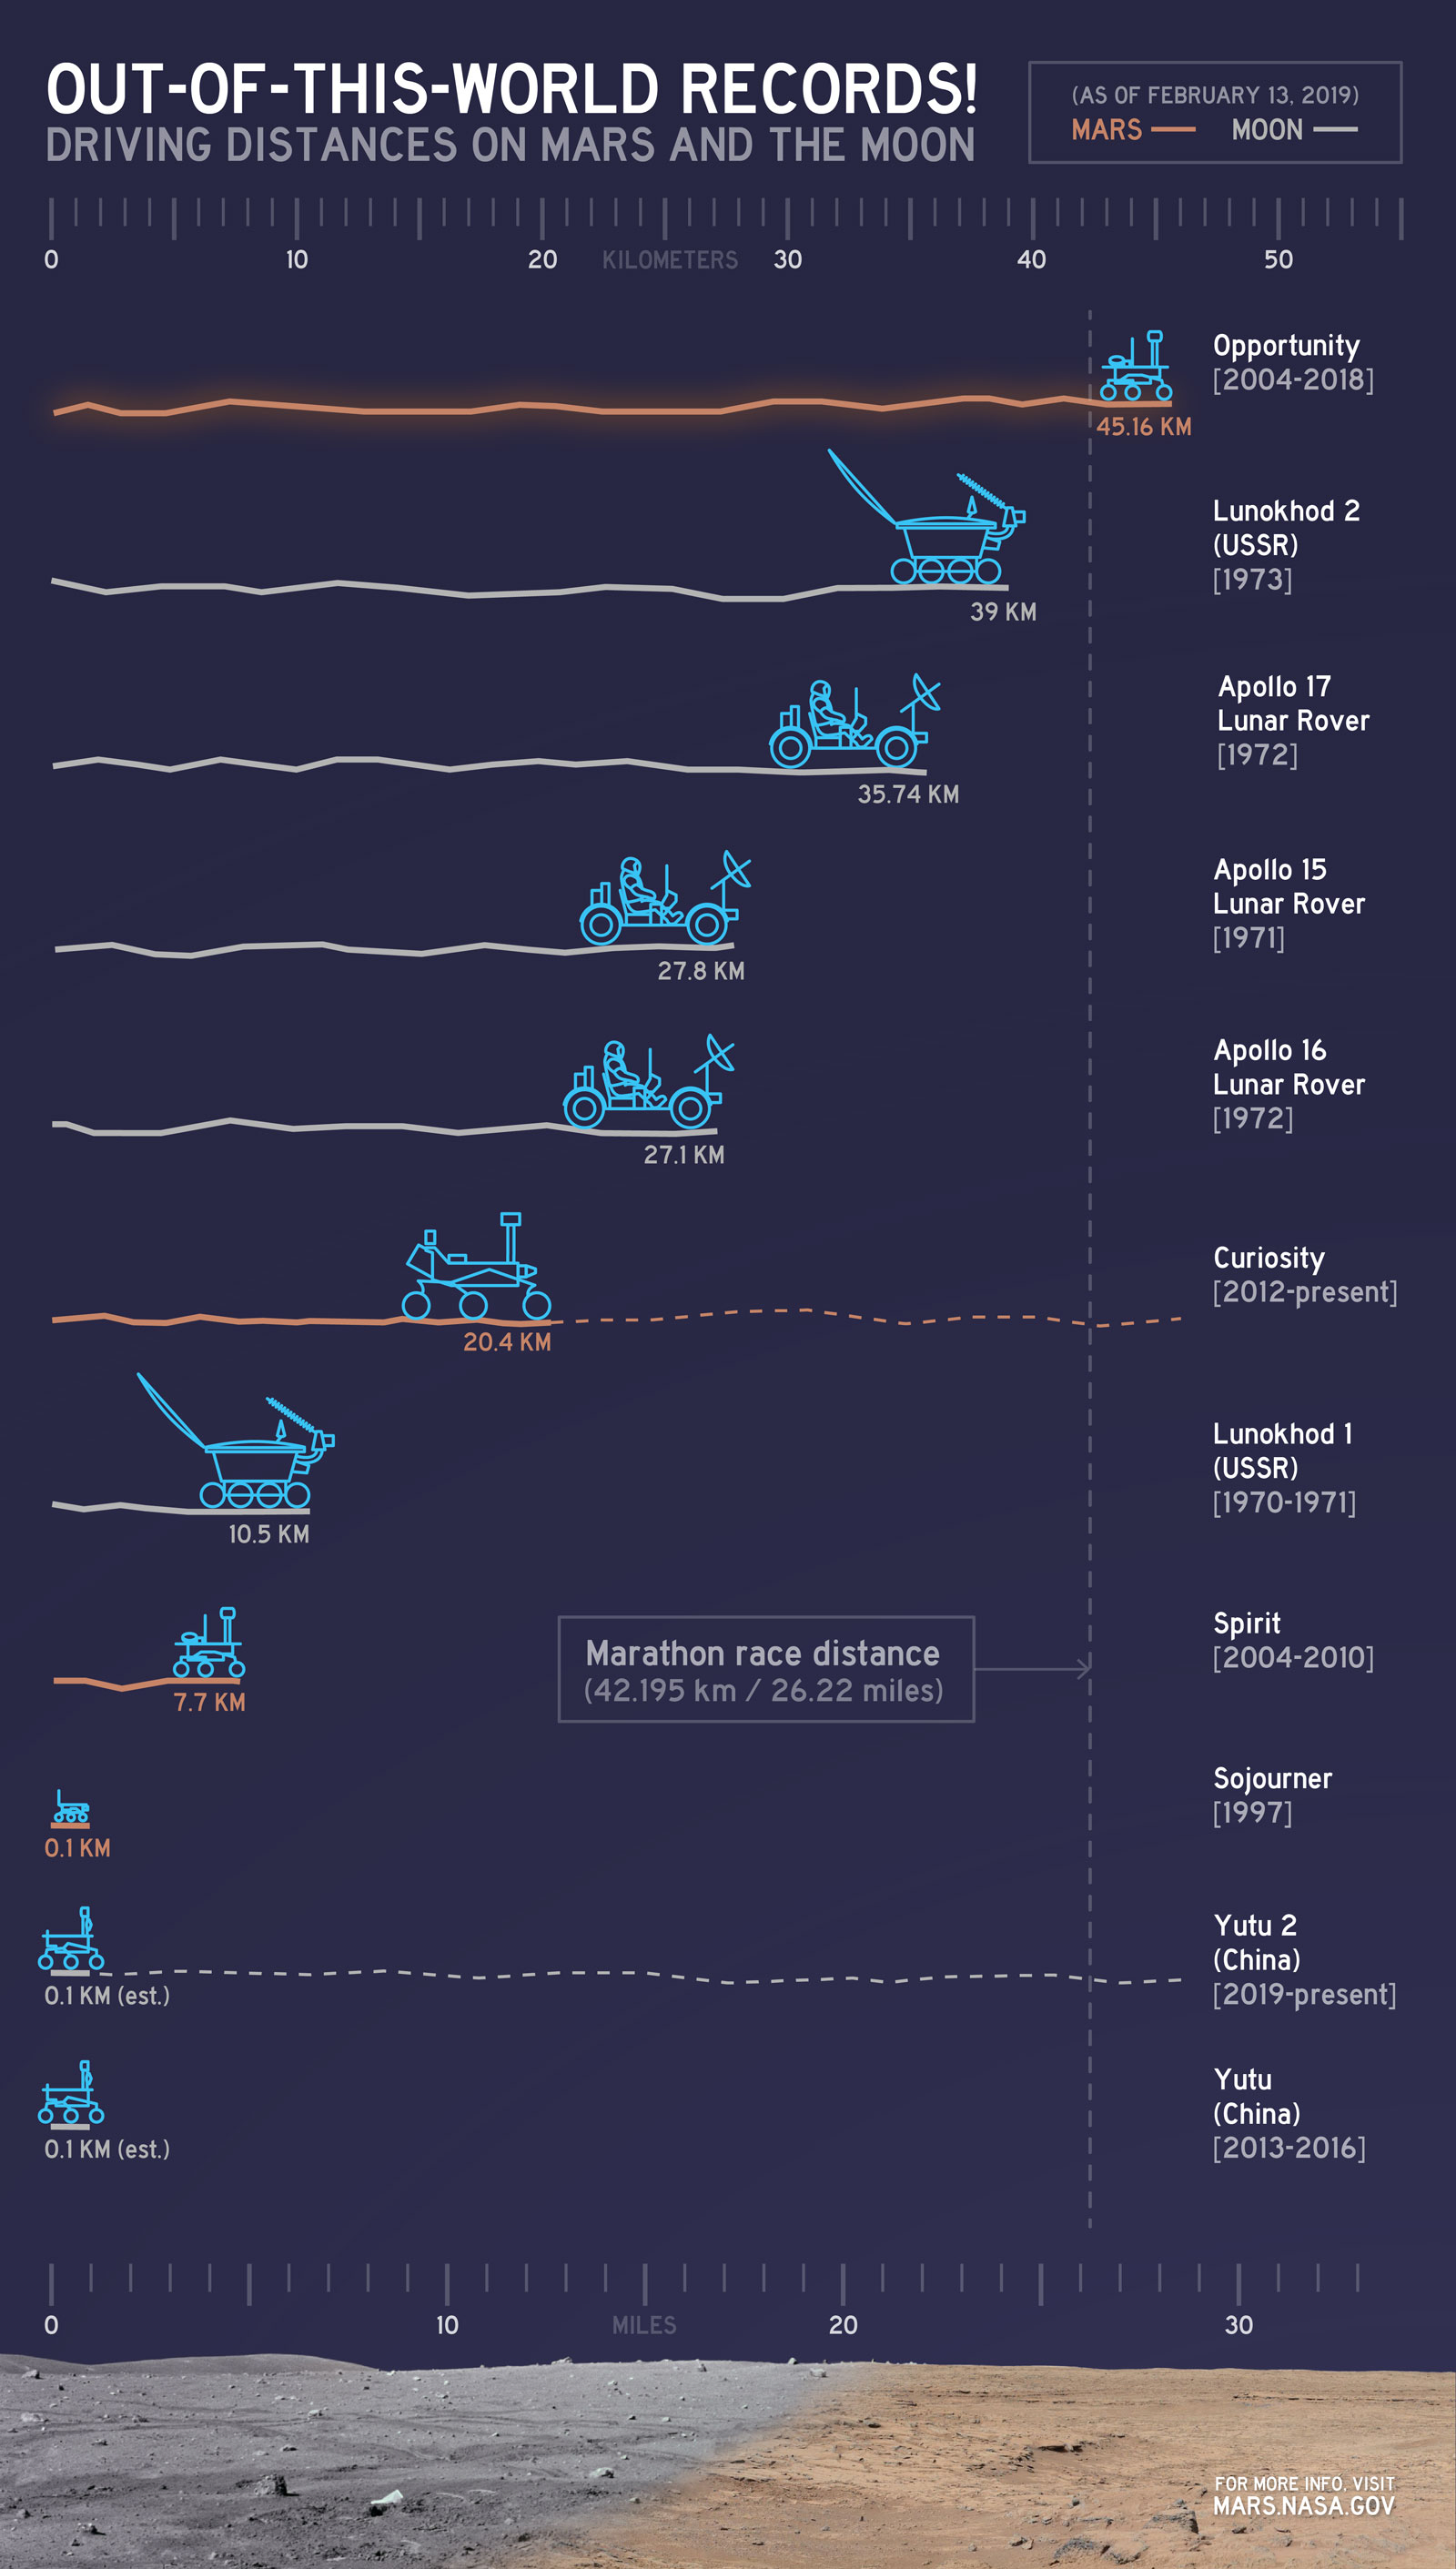 This chart illustrates comparisons among the distances driven by various wheeled vehicles on the surface of Earth's moon and Mars.